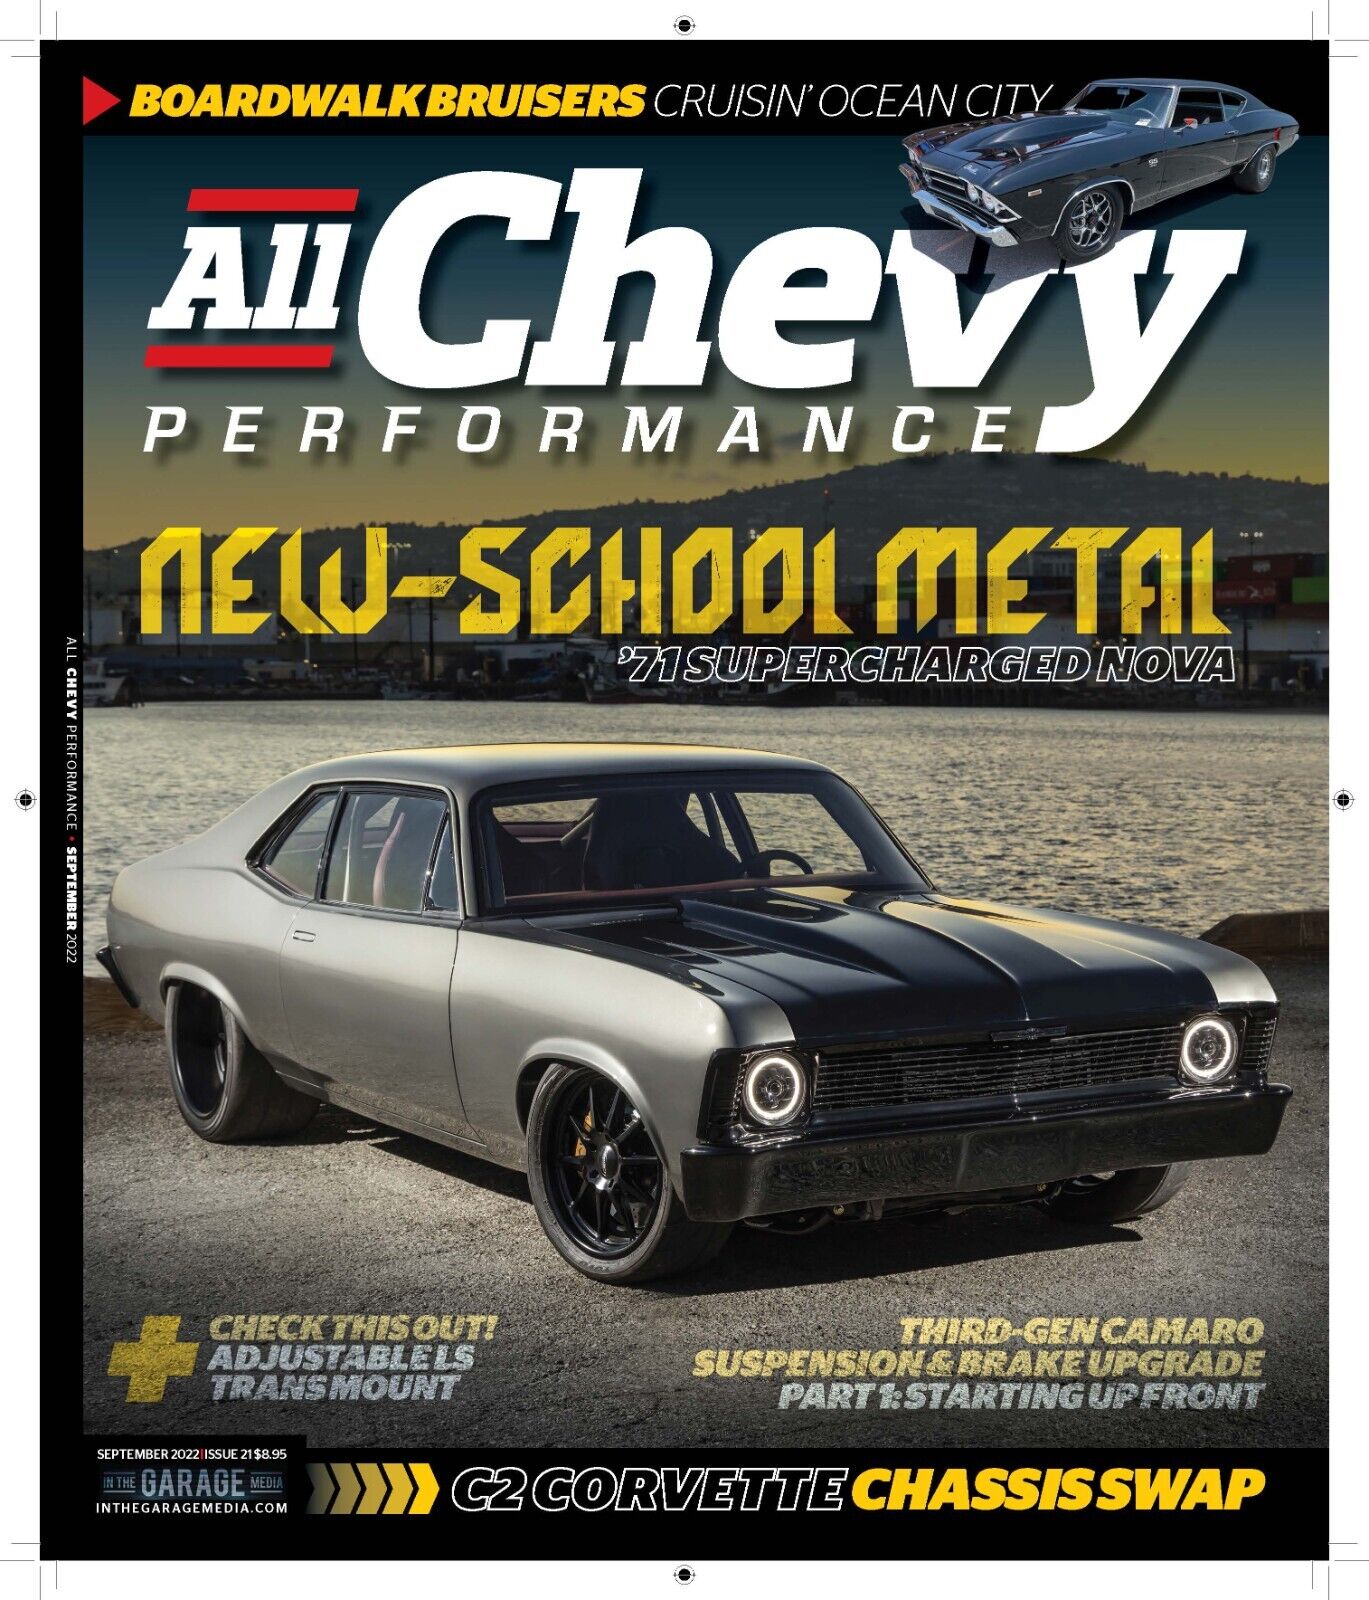 All Chevy Performance Magazine Issue #21 September 2022 - New